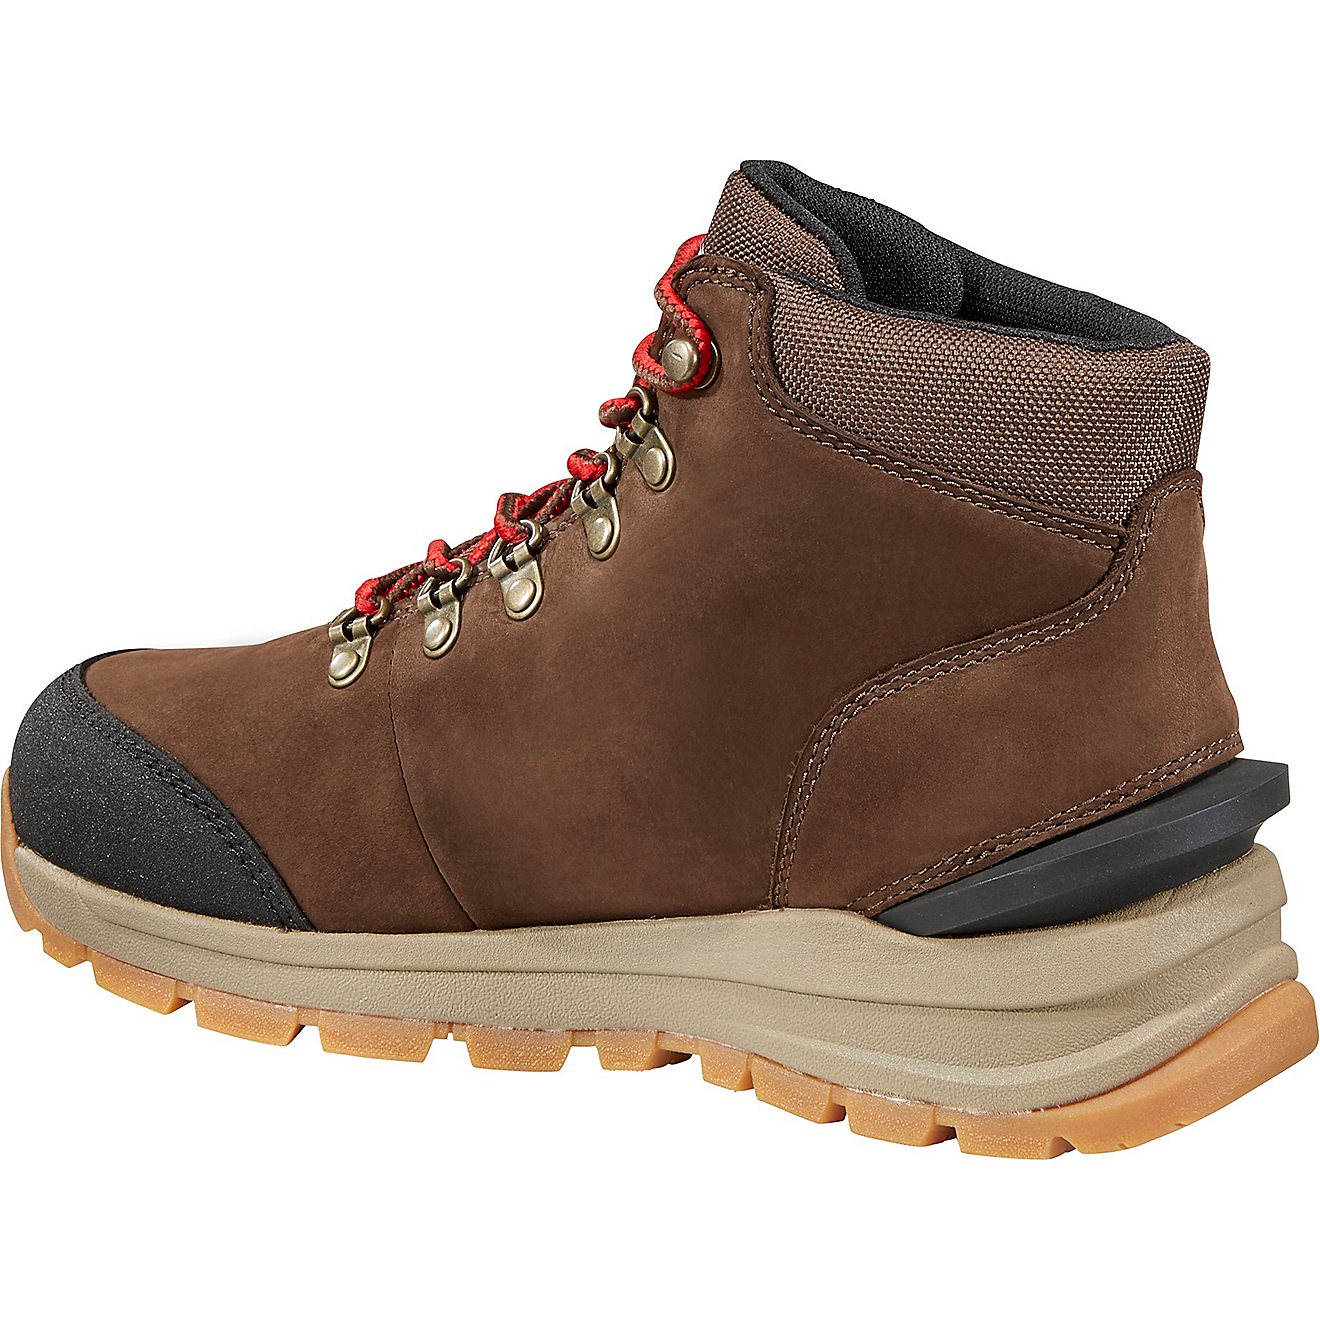 Carhartt Women's Gilmore 5 in Non-Safety Toe Waterproof Hiker Boots ...